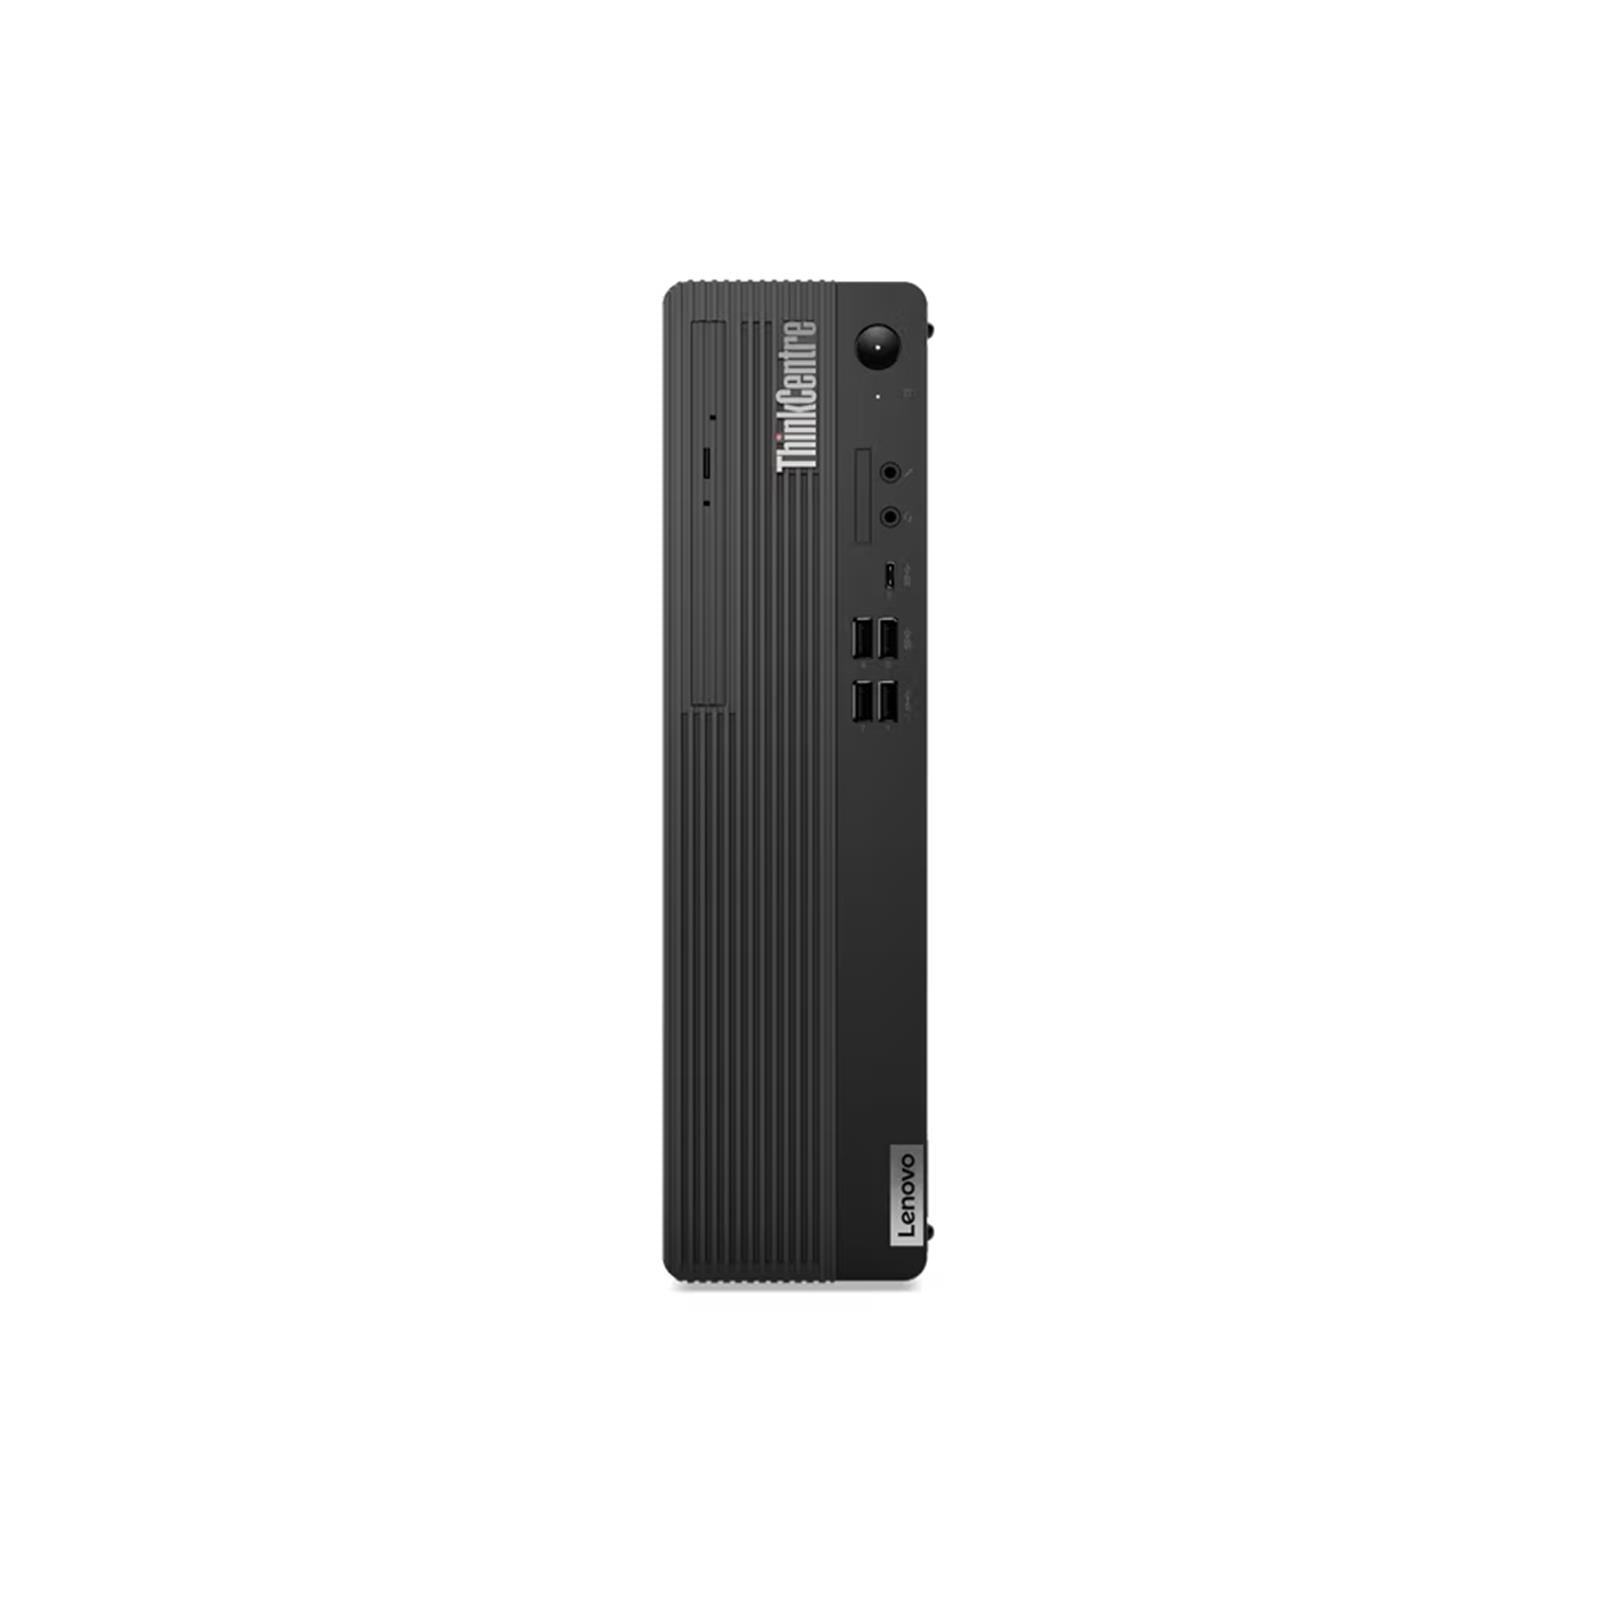 Lenovo ThinkCentre M90s 11D10042UK Small Form Factor PC, Intel Core i5-10500 vPro, 8GB RAM, 256GB SSD, Windows 10 Pro with Keyboard and Mouse